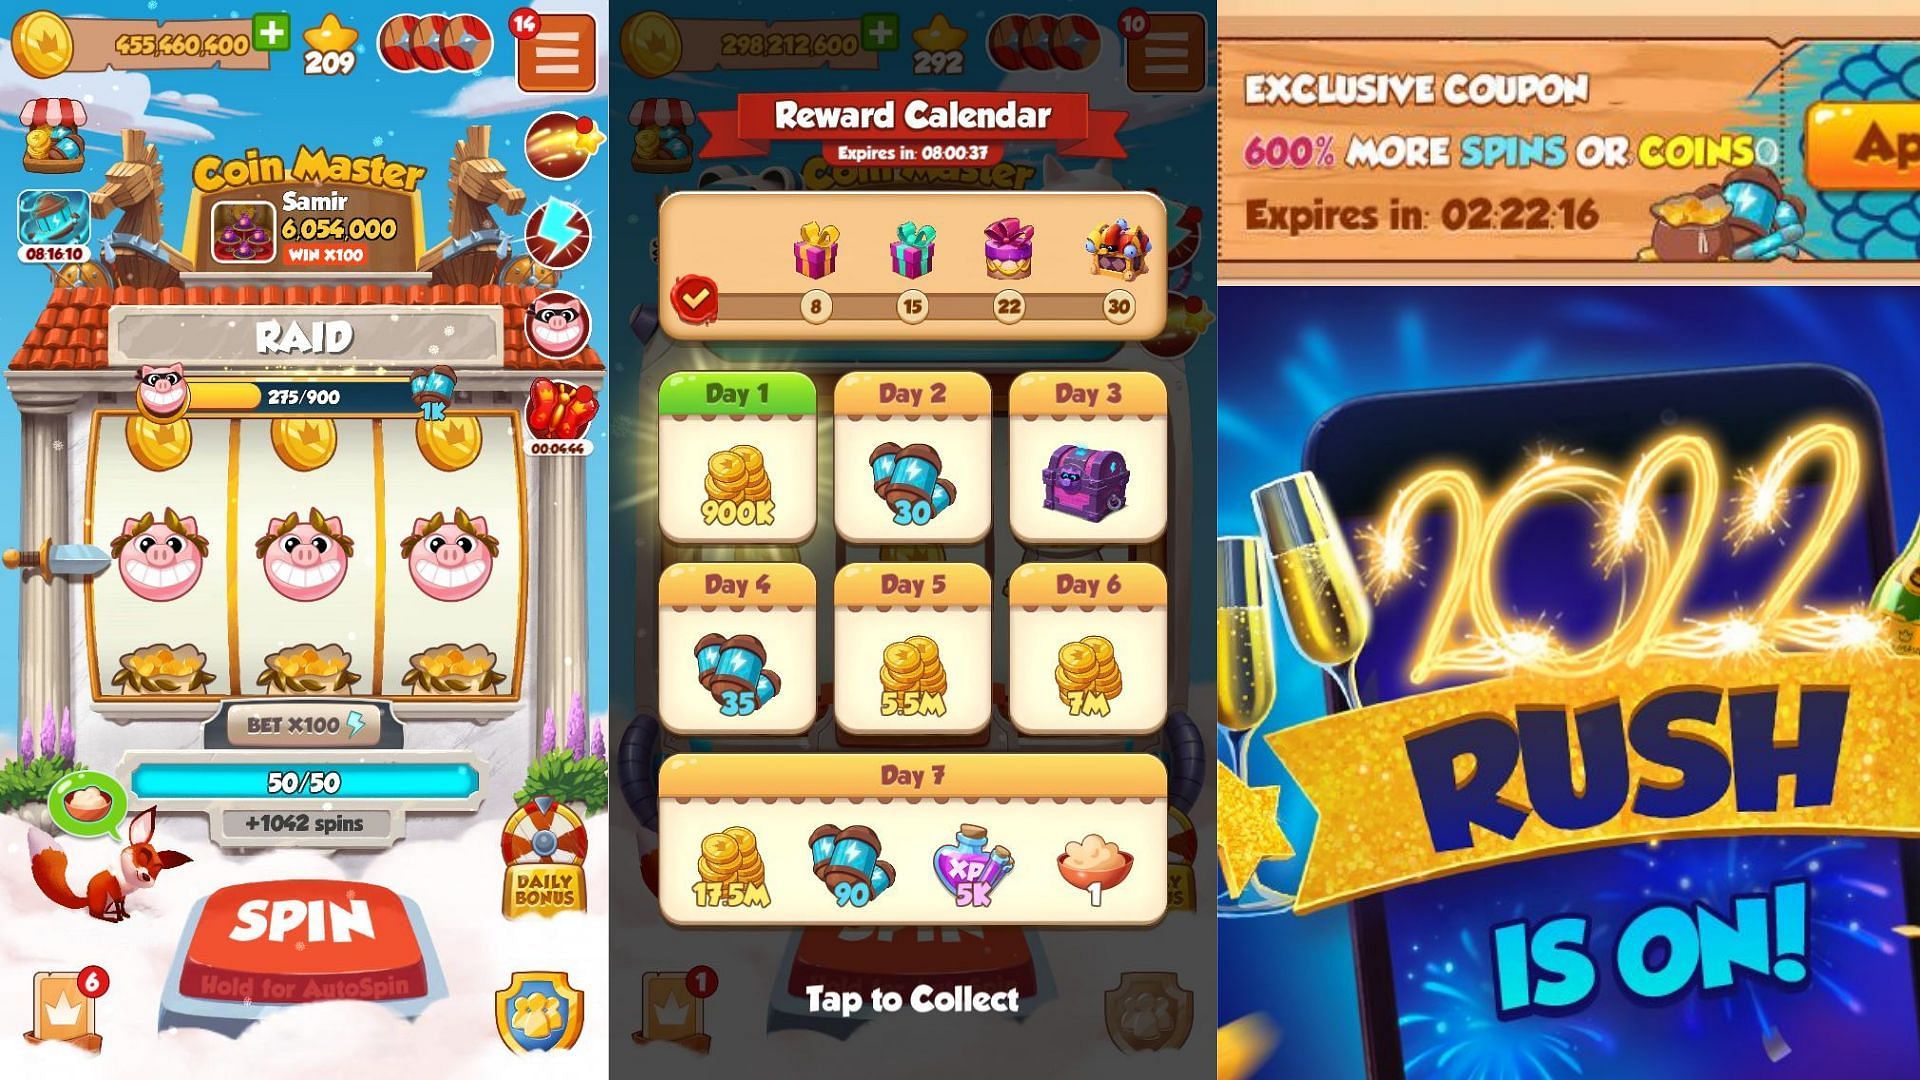 Daily rewards and rewards calendar will also host bigger rewards over the course of the event. (Image via Coin Master Wiki)